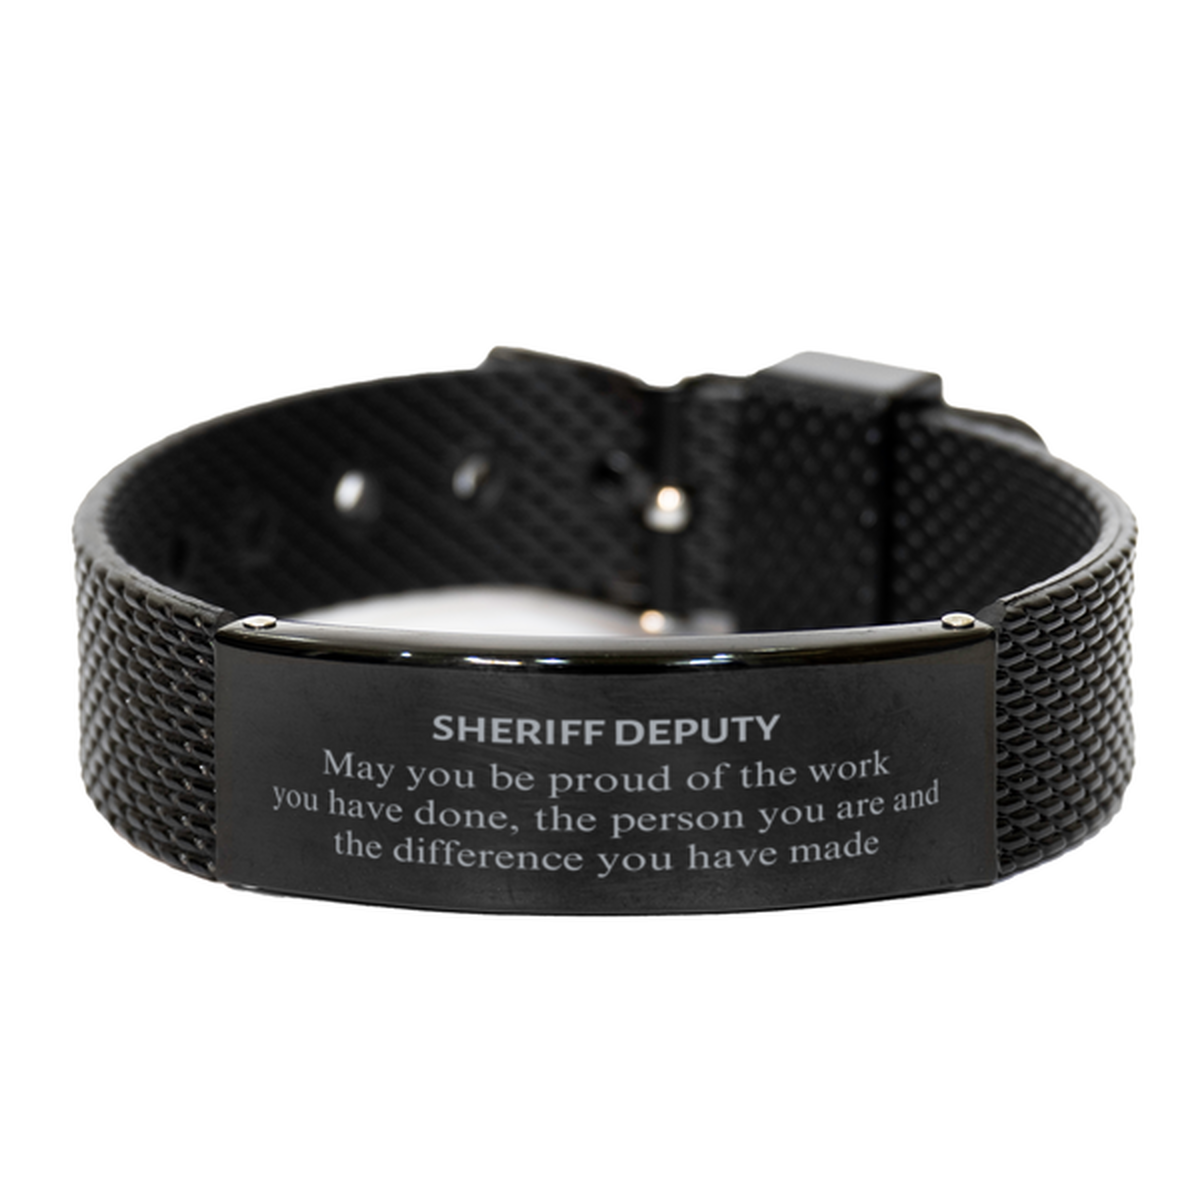 Sheriff Deputy May you be proud of the work you have done, Retirement Sheriff Deputy Black Shark Mesh Bracelet for Colleague Appreciation Gifts Amazing for Sheriff Deputy